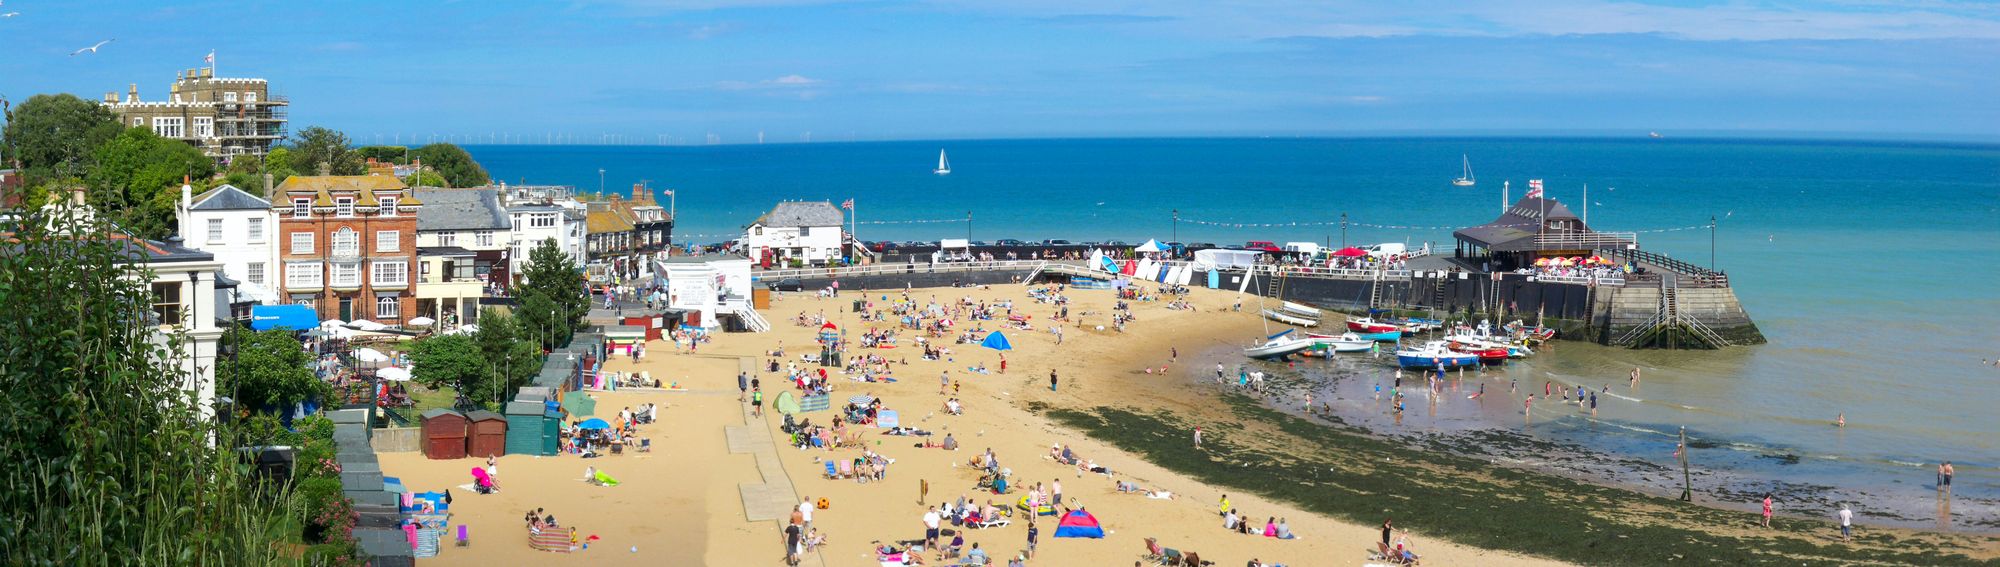 Top places to stay in Broadstairs